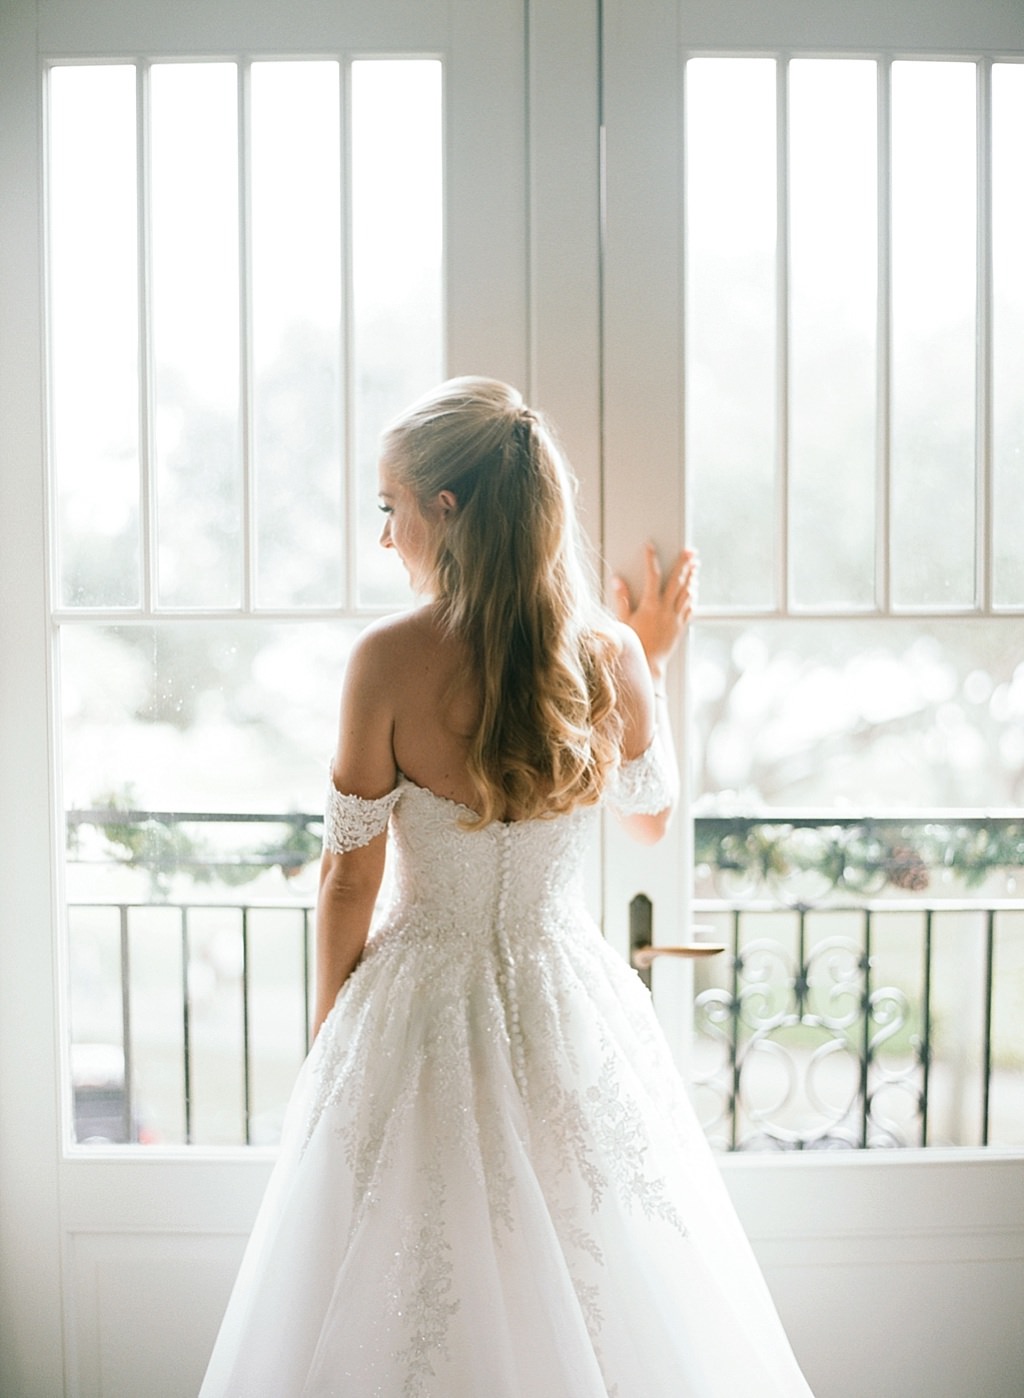 Elegant Tampa Bride Wedding Portrait in Ballgown Off the Shoulder Floral Lace, Rhinestone and Tulle Wedding Dress